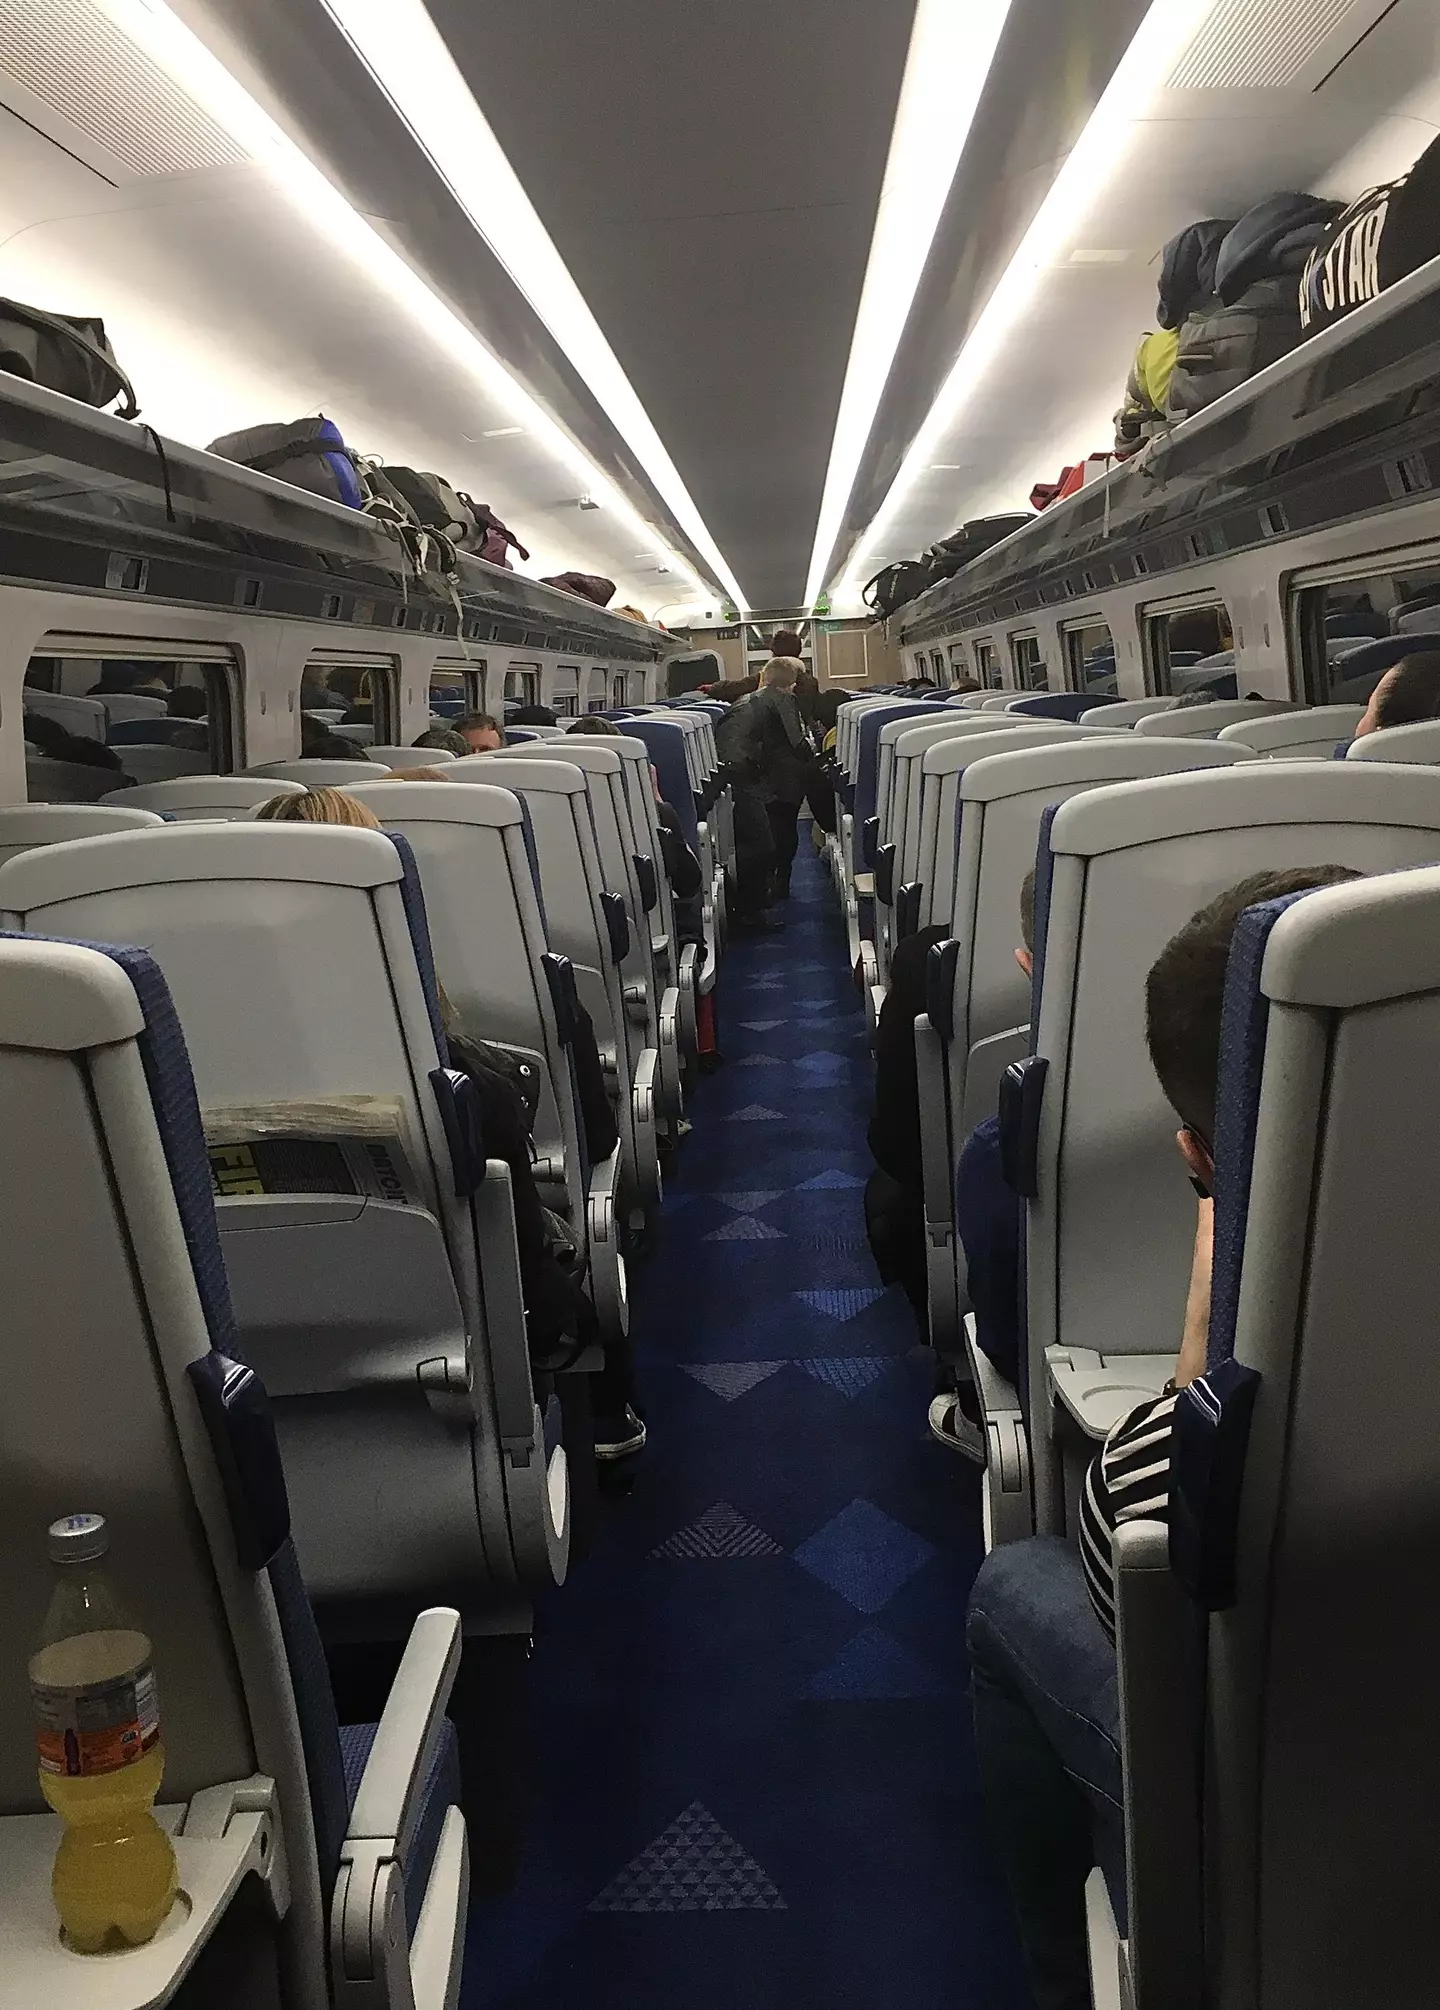 A train passenger has spoken out about their seat being taken.